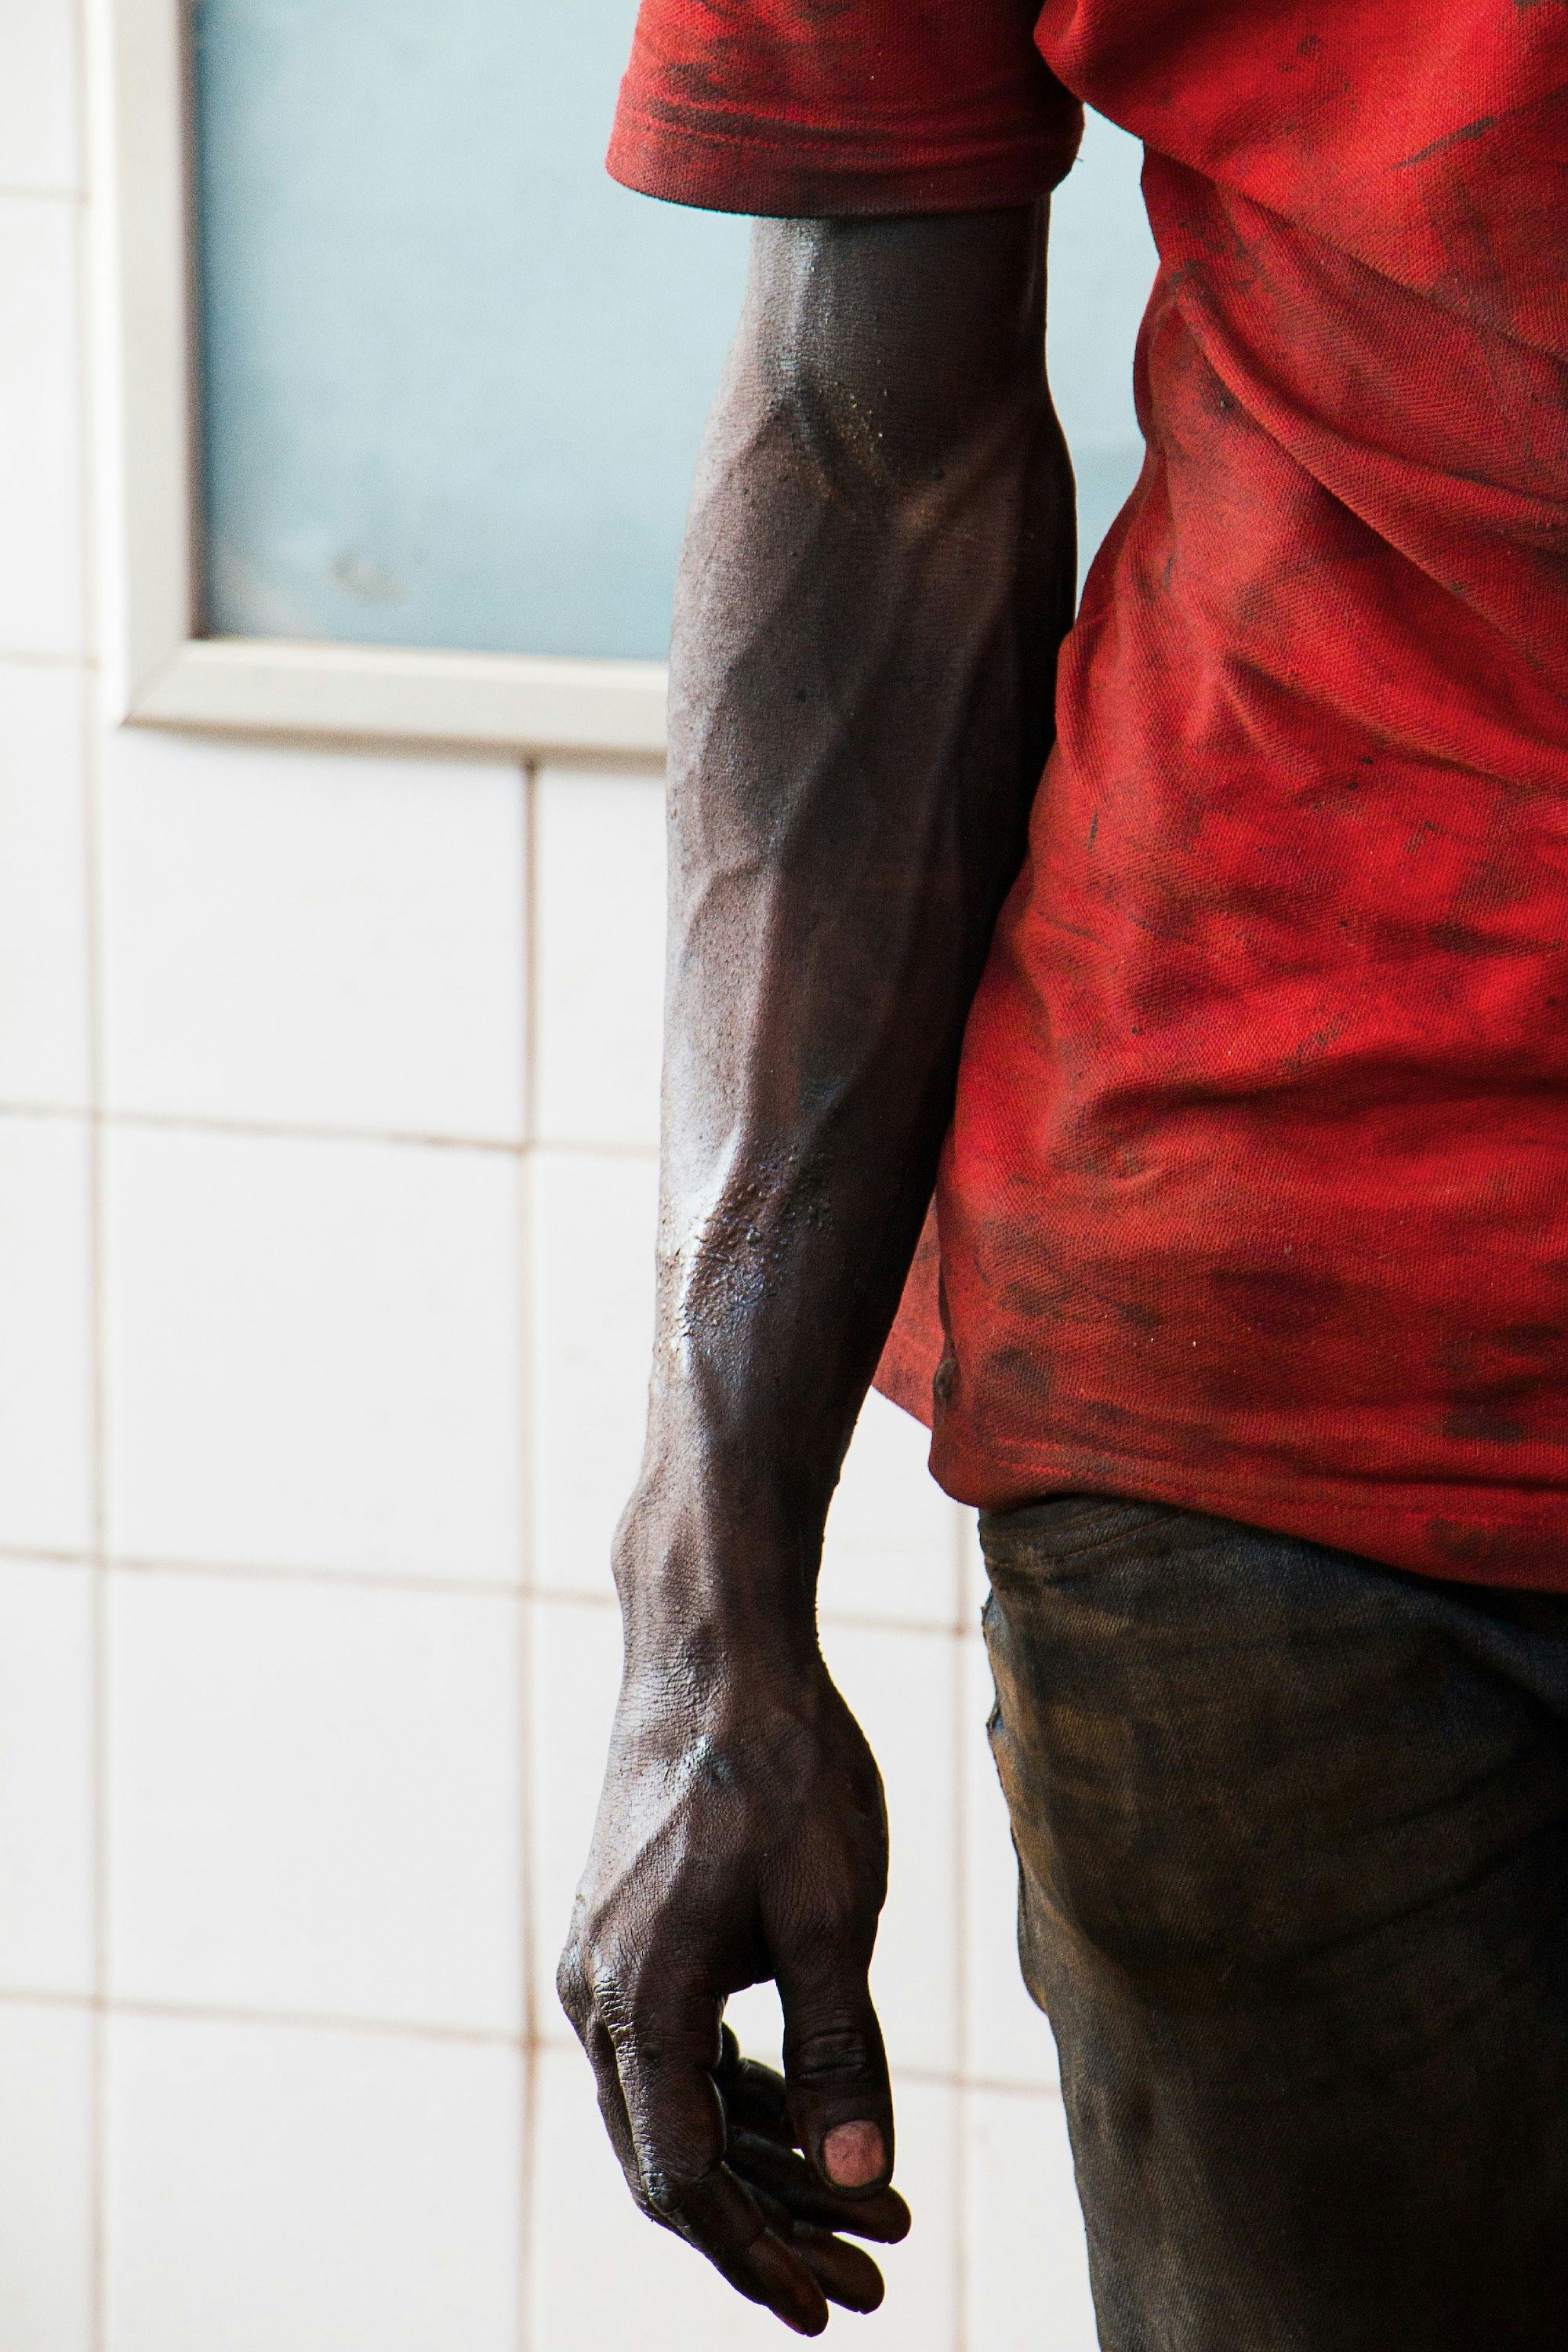 Cropped image of a black man's arm with visible veins and a red t-shirt in front of a tiled wall.